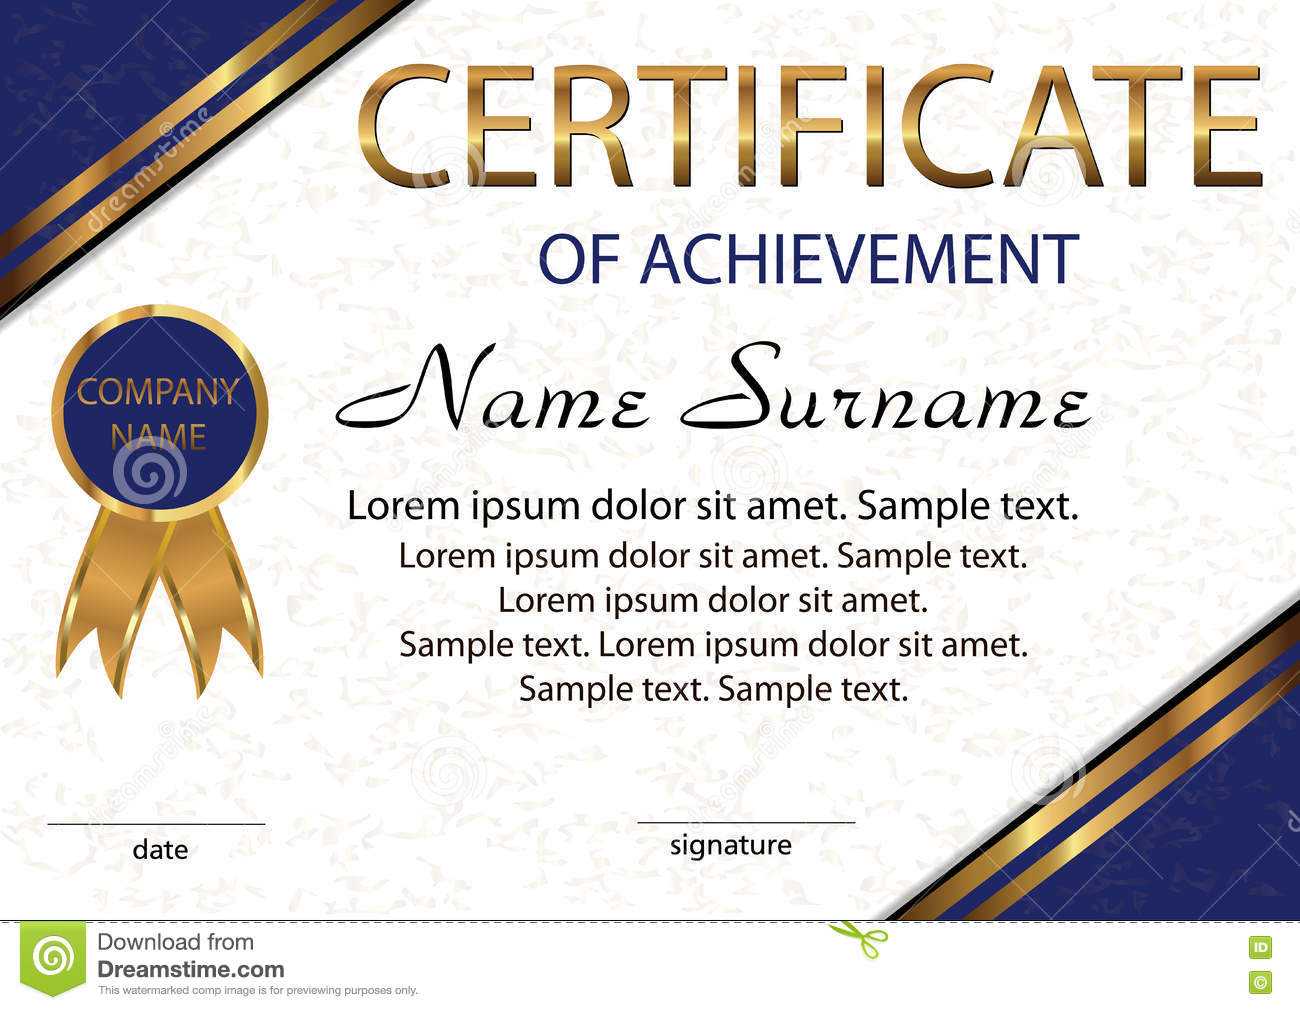 Certificate Of Achievement Or Diploma. Elegant Light With Certificate Of Attainment Template